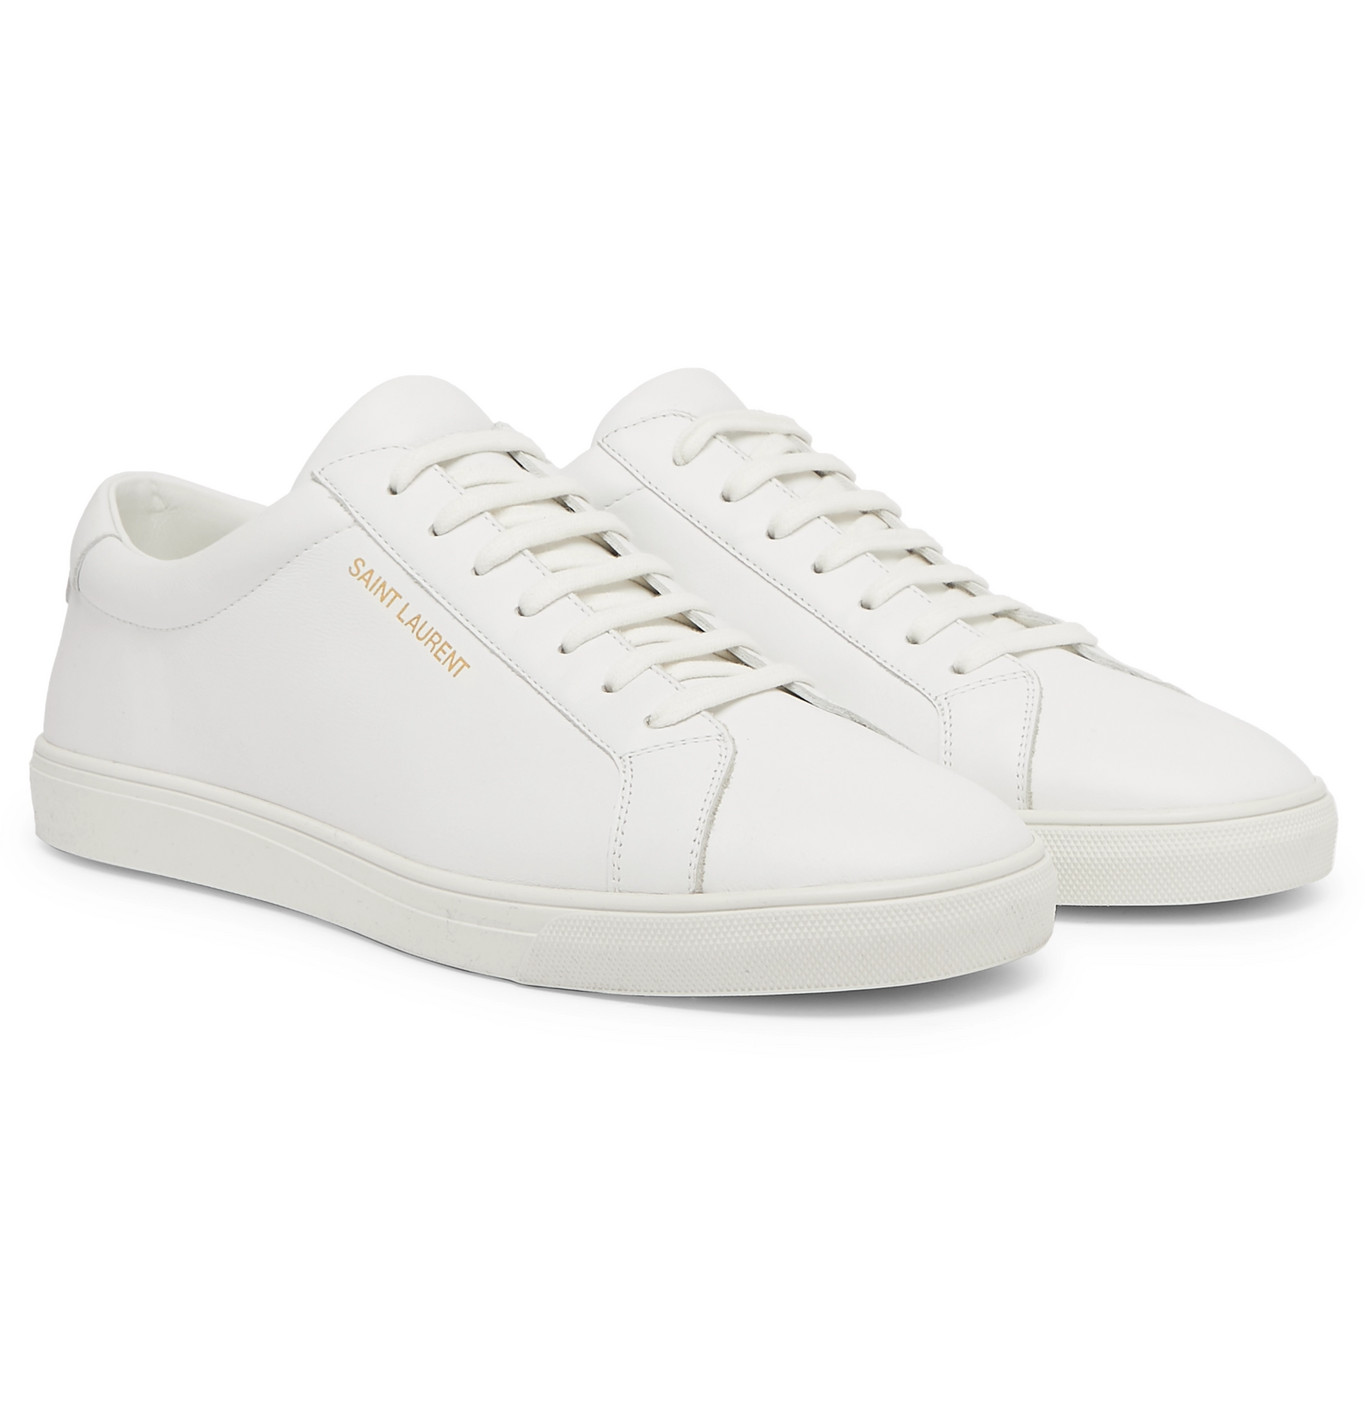 SAINT LAURENT - Andy Moon Leather Sneakers - Men - White | The Fashionisto